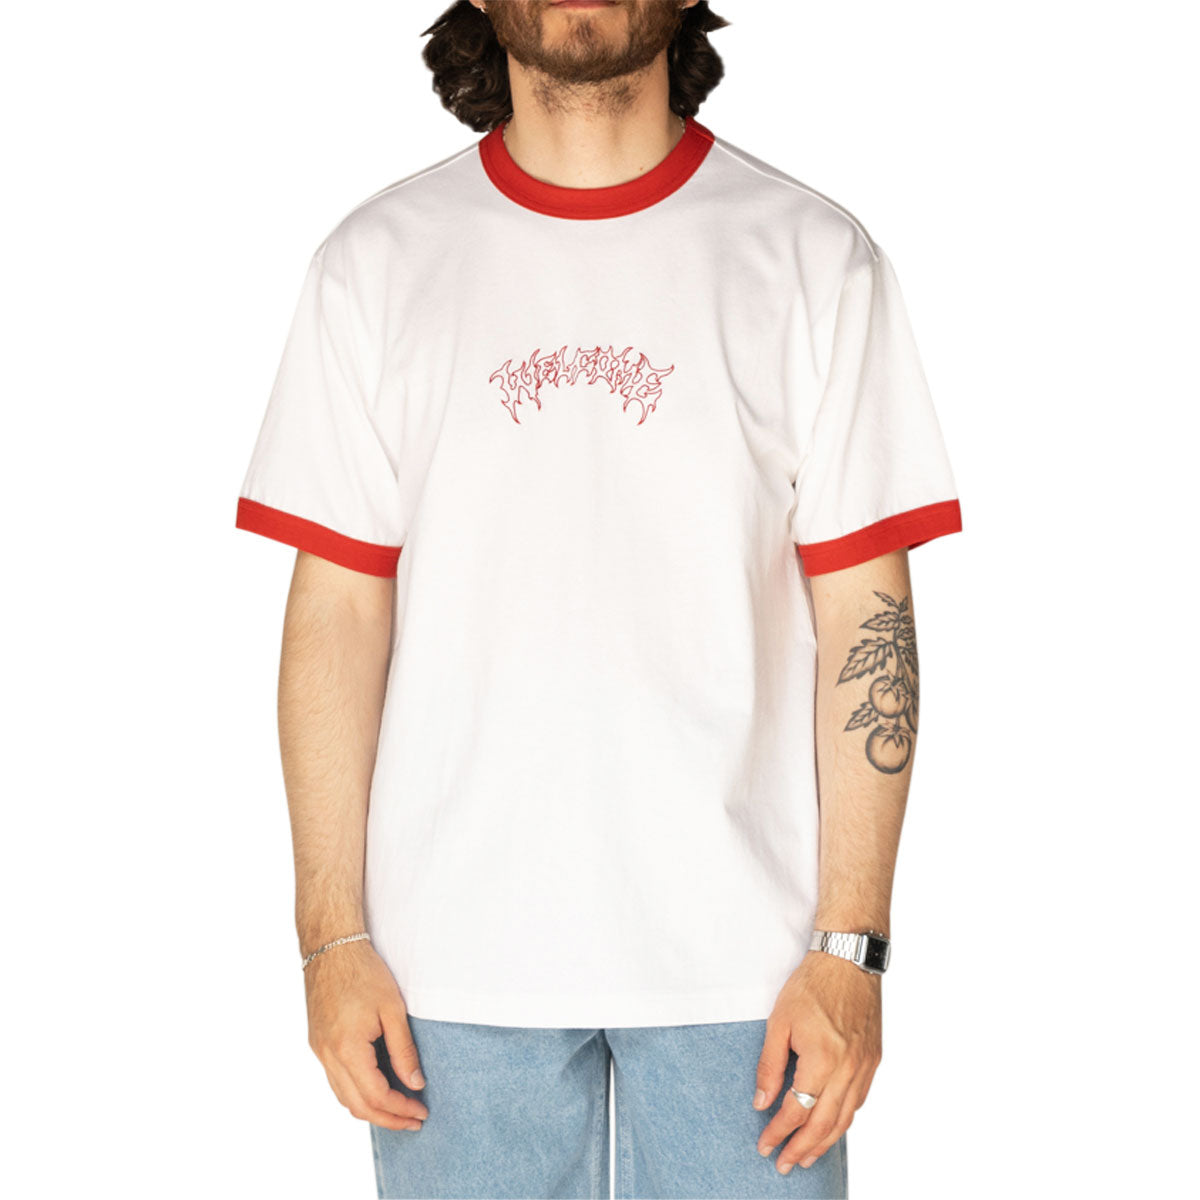 Welcome Barb Ringer T-Shirt - White/Red image 2